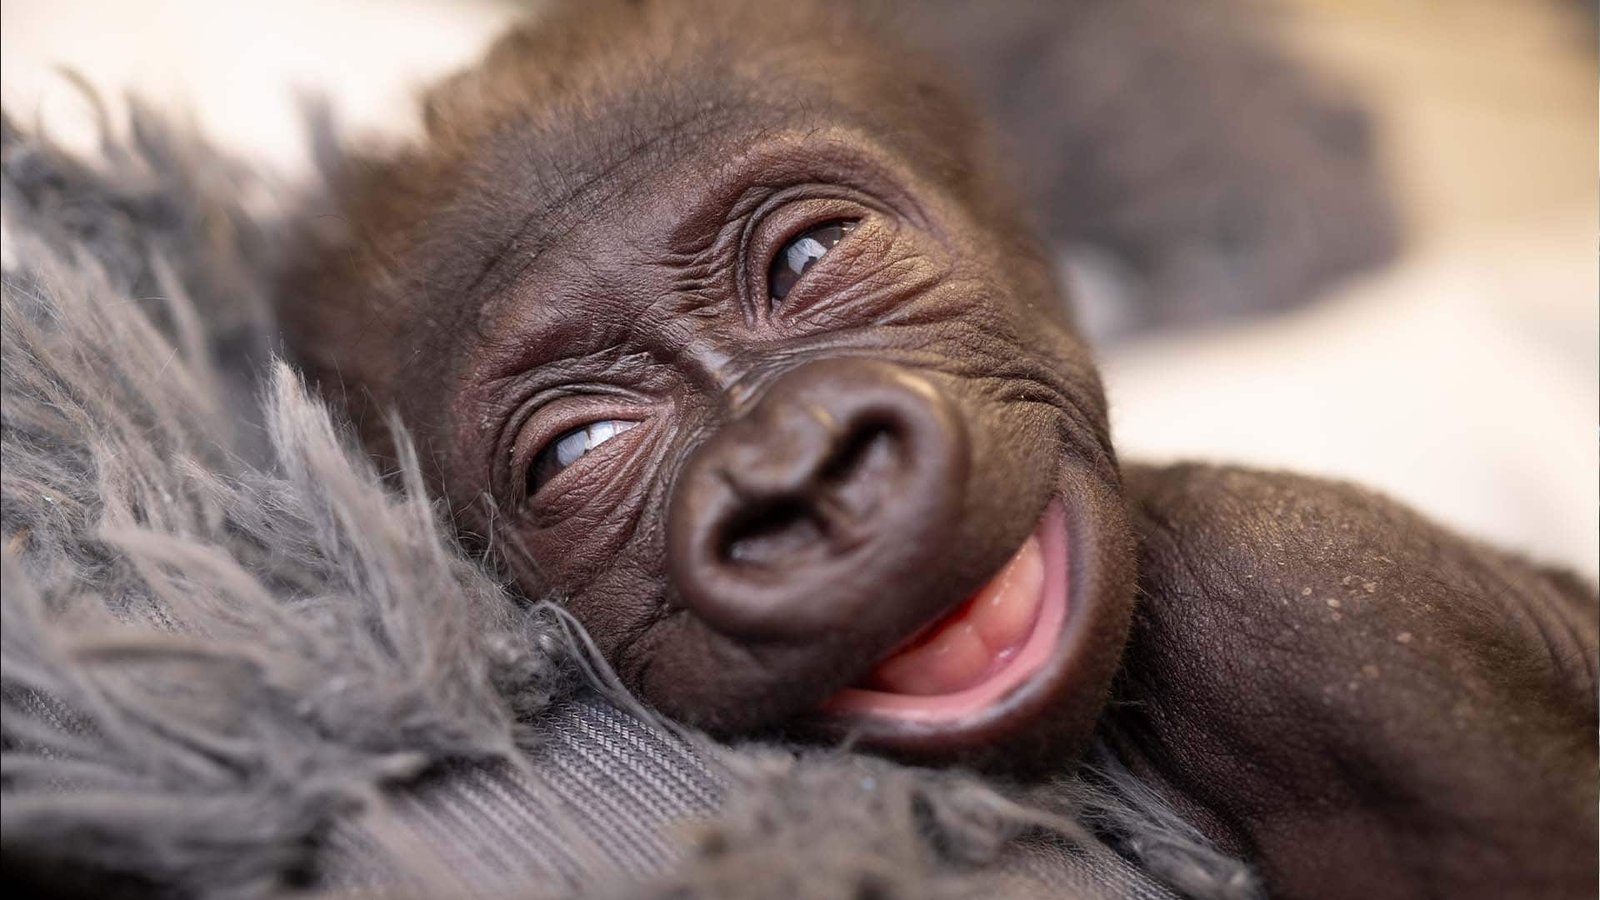 TheMoment a medical doctor delivered a baby gorilla